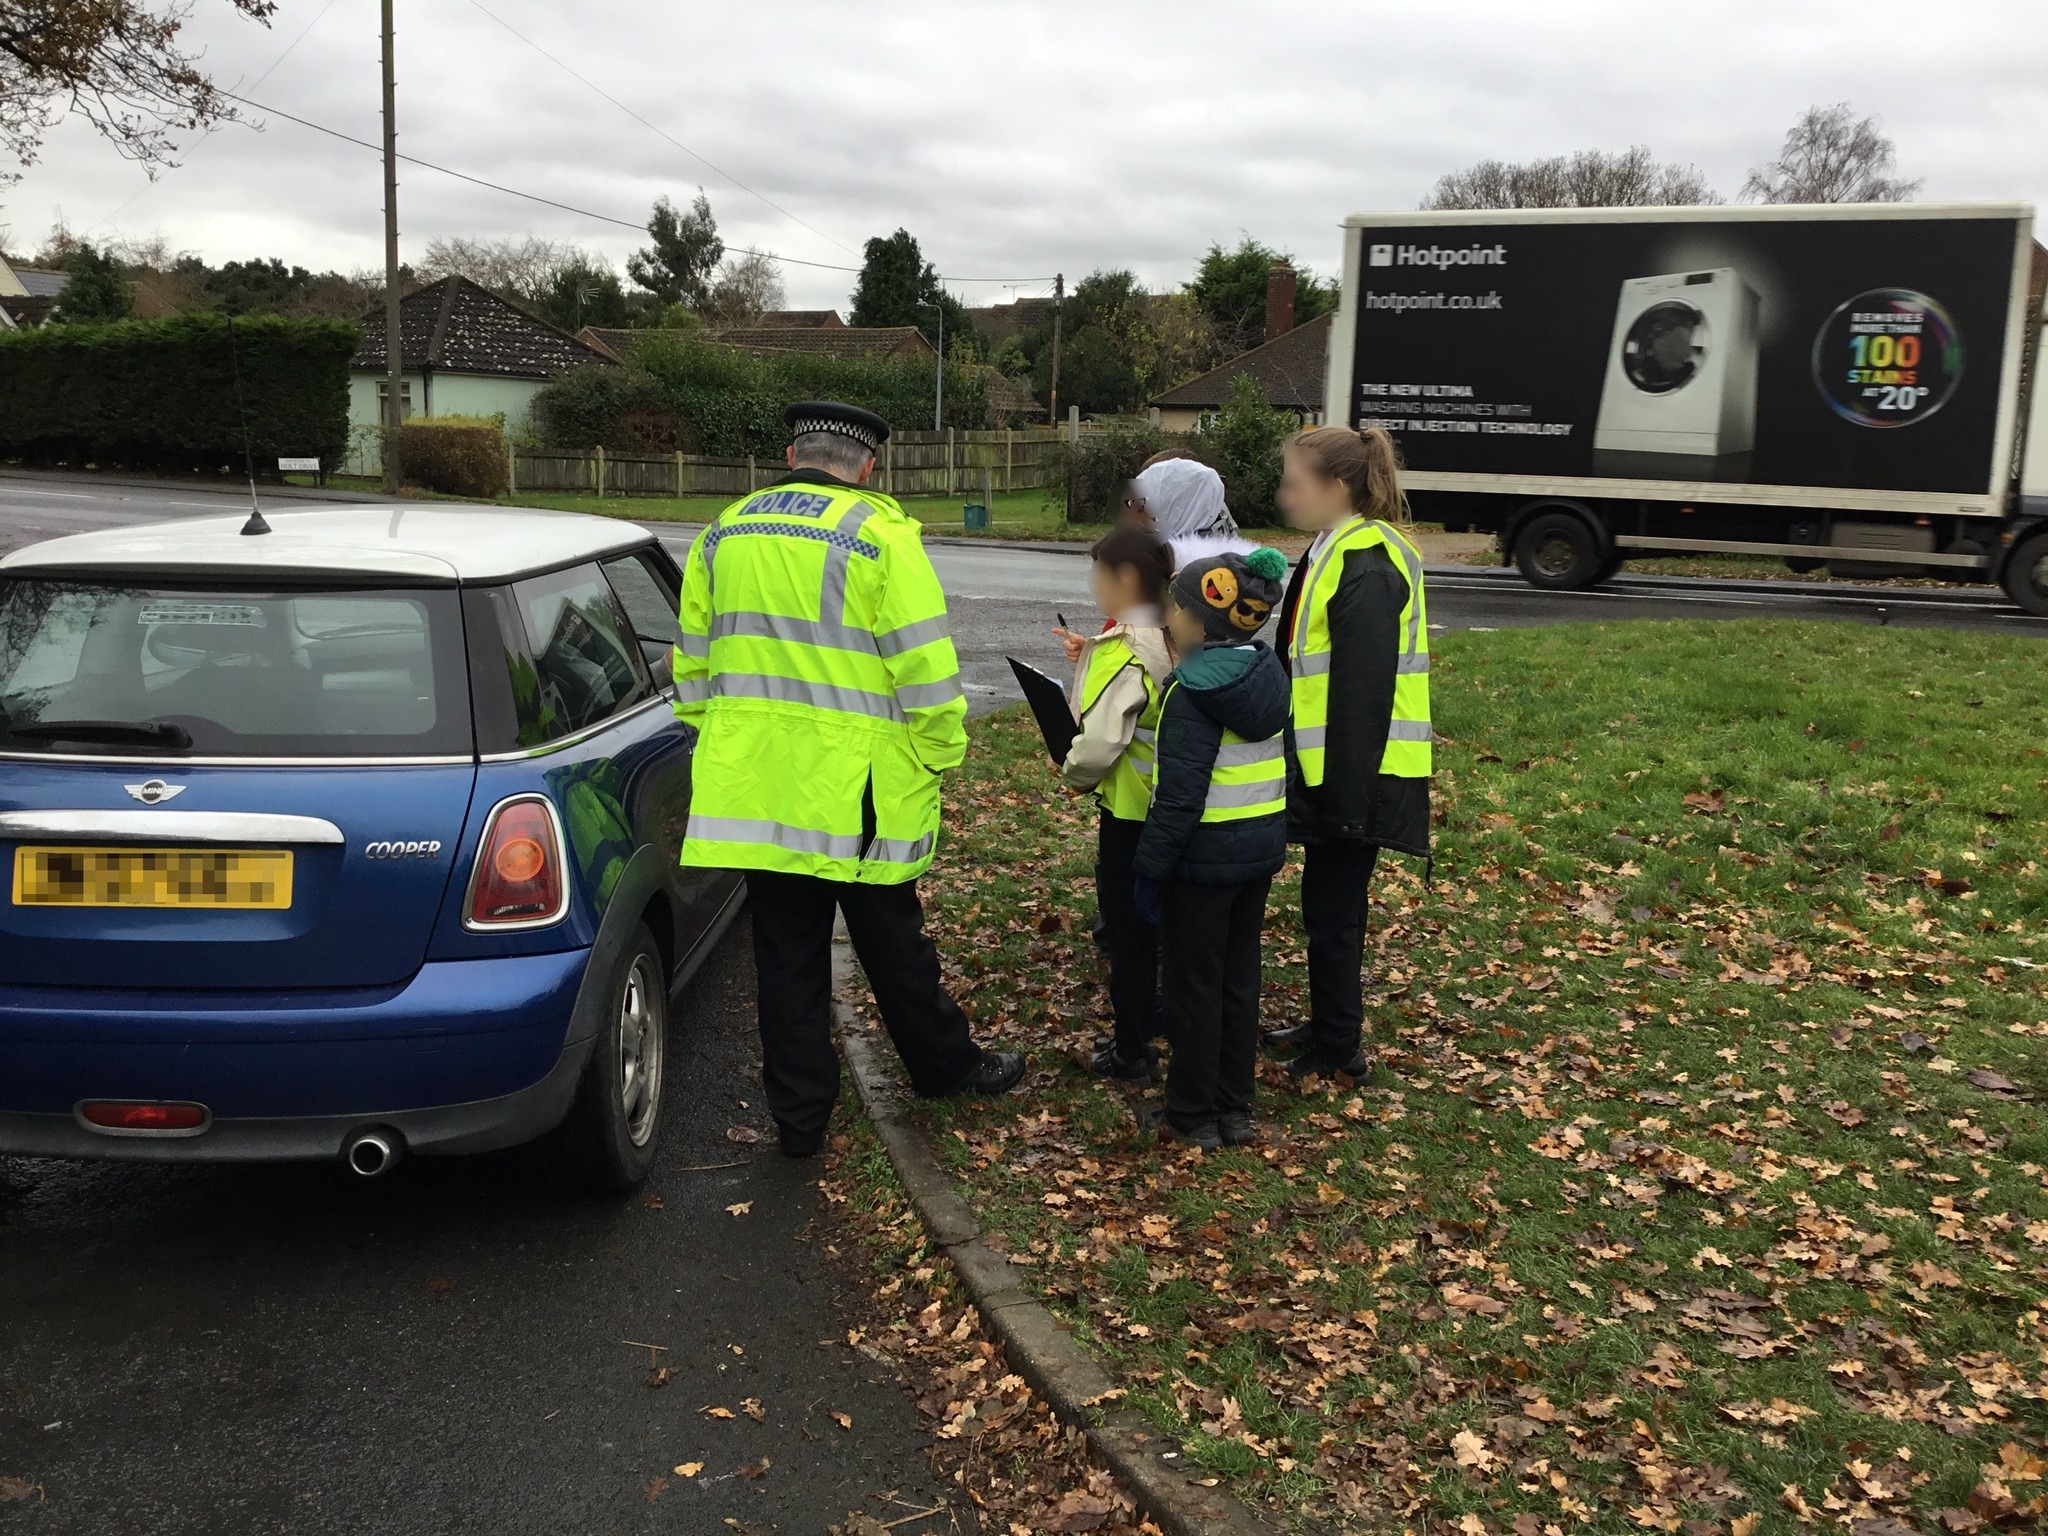 Slow down - pupils at Cherry Tree Academy got the chance to challenge speedy drivers Picture: Essex Police